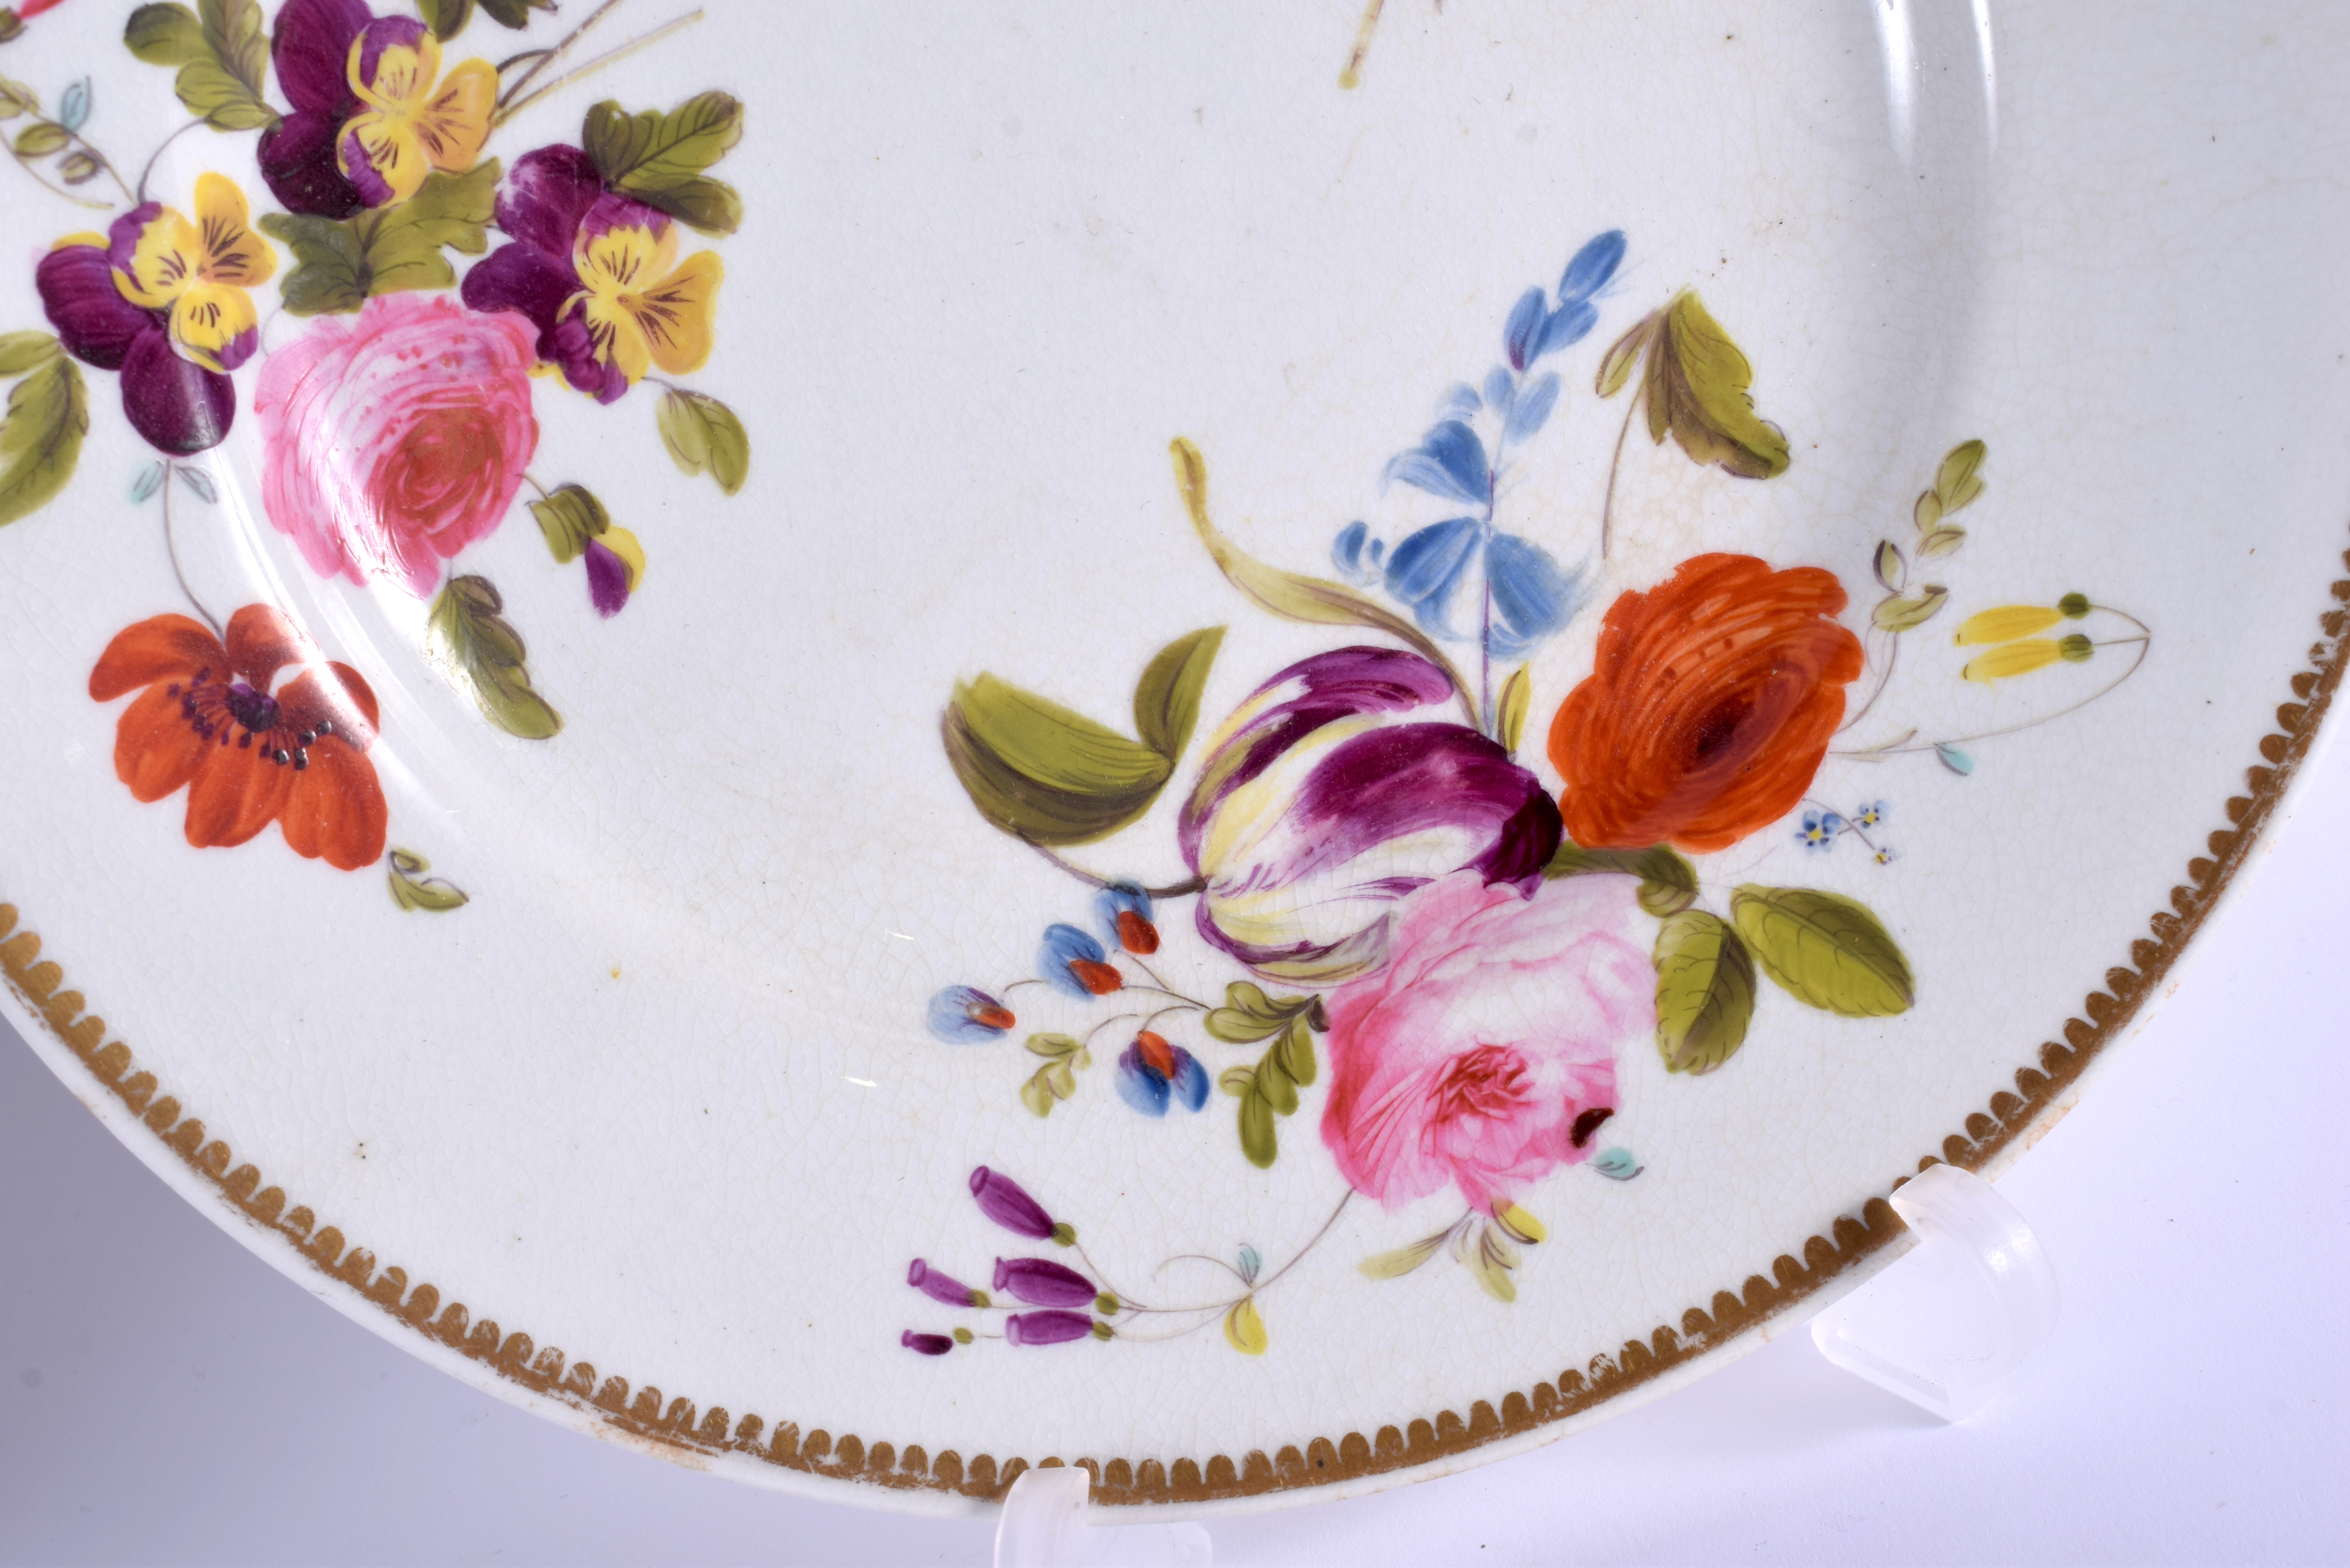 A PAIR OF EARLY 19TH CENTURY DERBY PORCELAIN PLATES painted with botanical sprays. 20 cm diameter. - Image 3 of 8